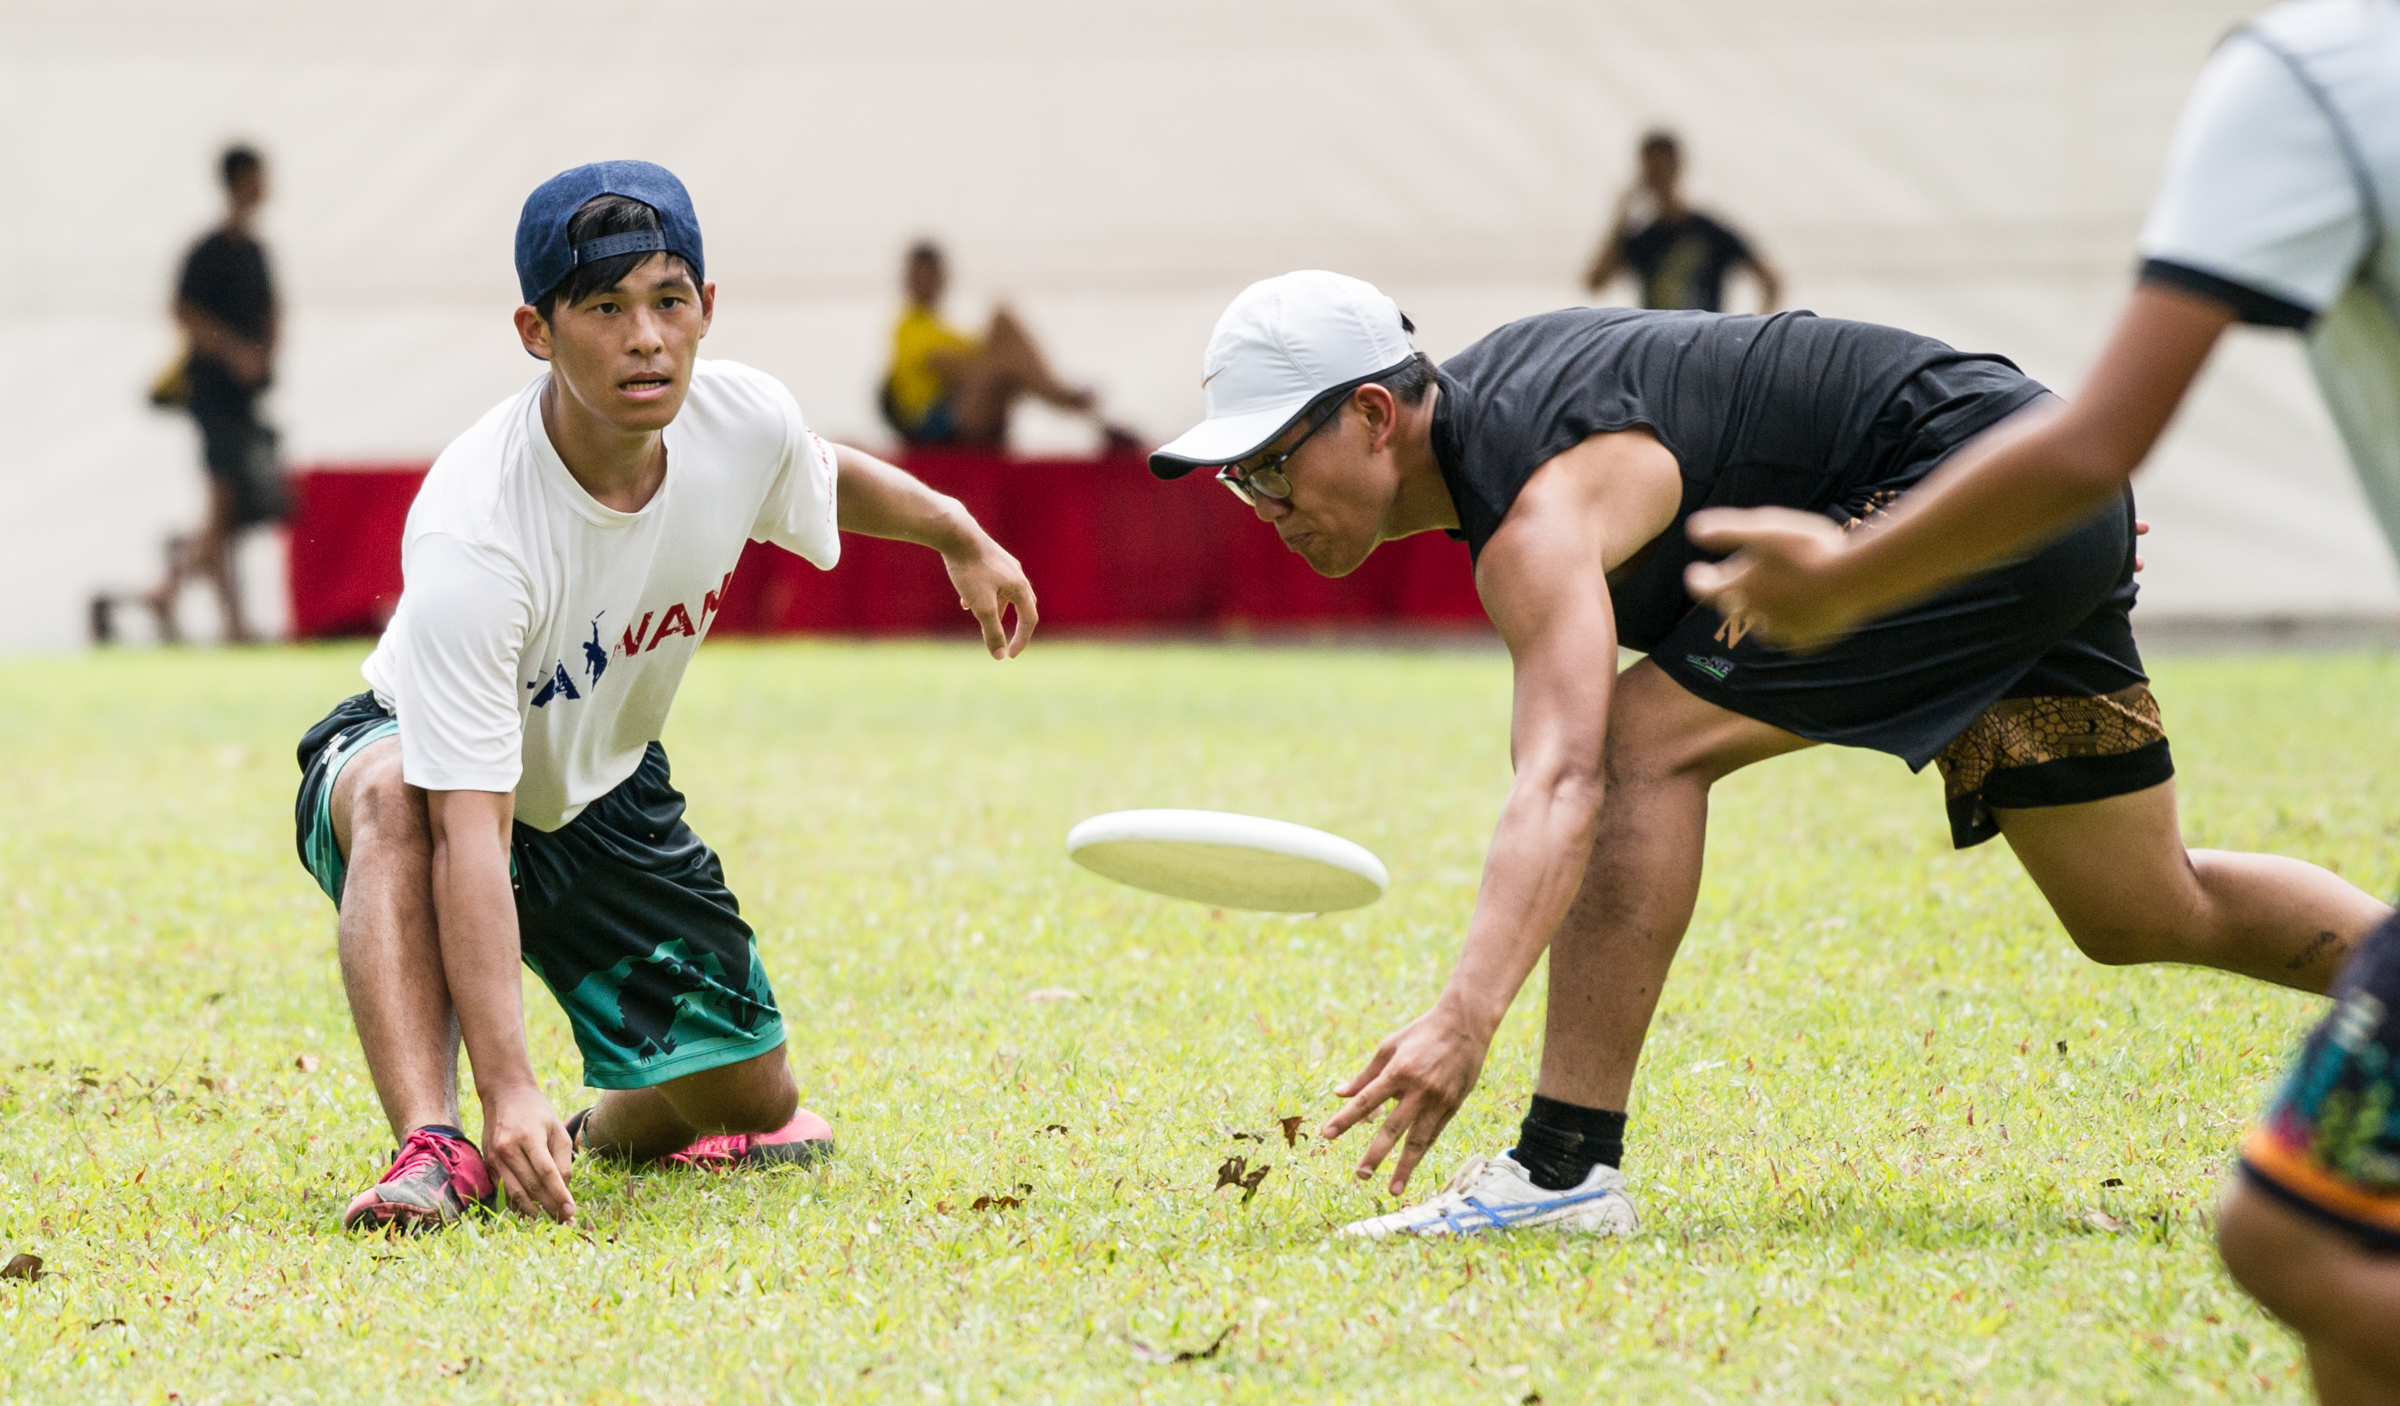 A player passes a frisbee past an opponent during a friendly at Ang Mo Kio Central.